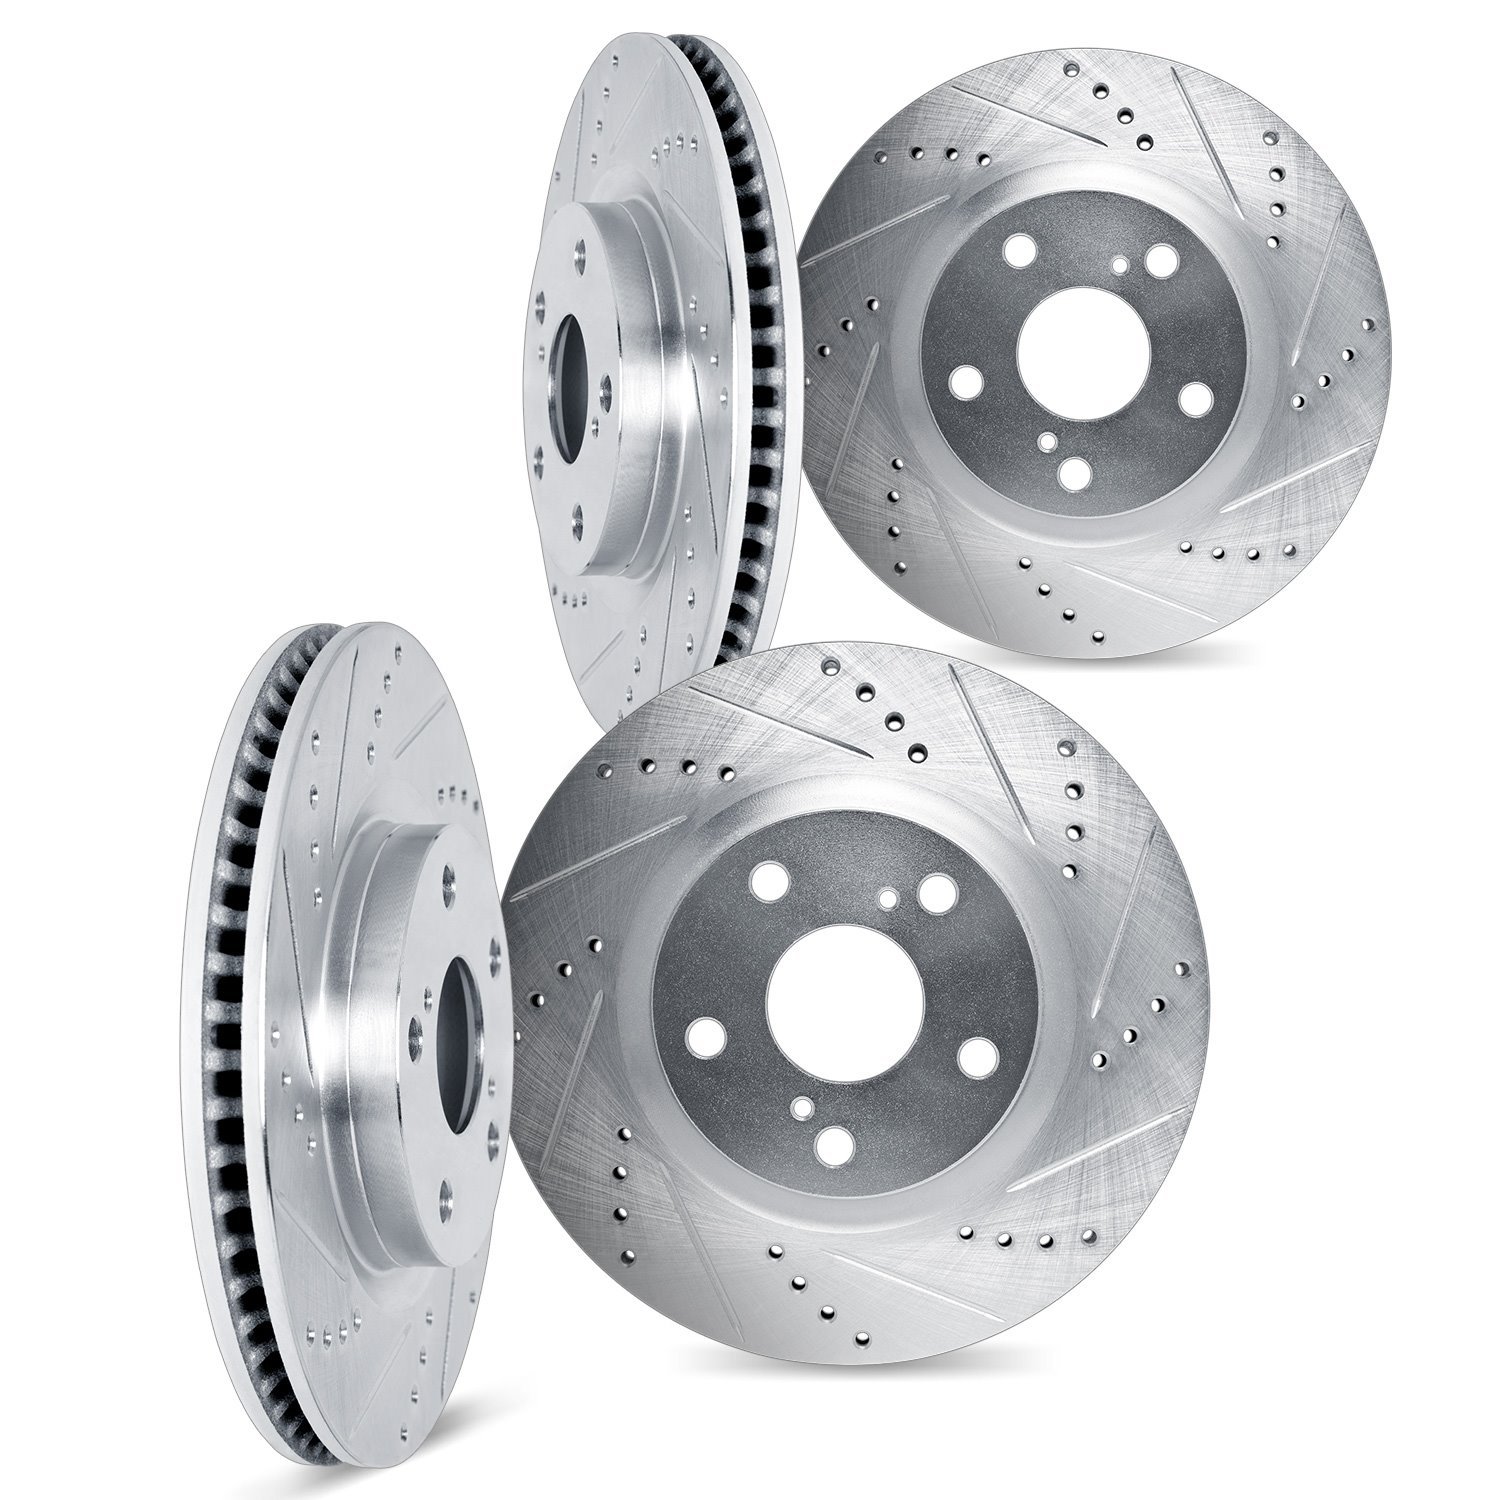 7004-46036 Drilled/Slotted Brake Rotors [Silver], Fits Select GM, Position: Front and Rear